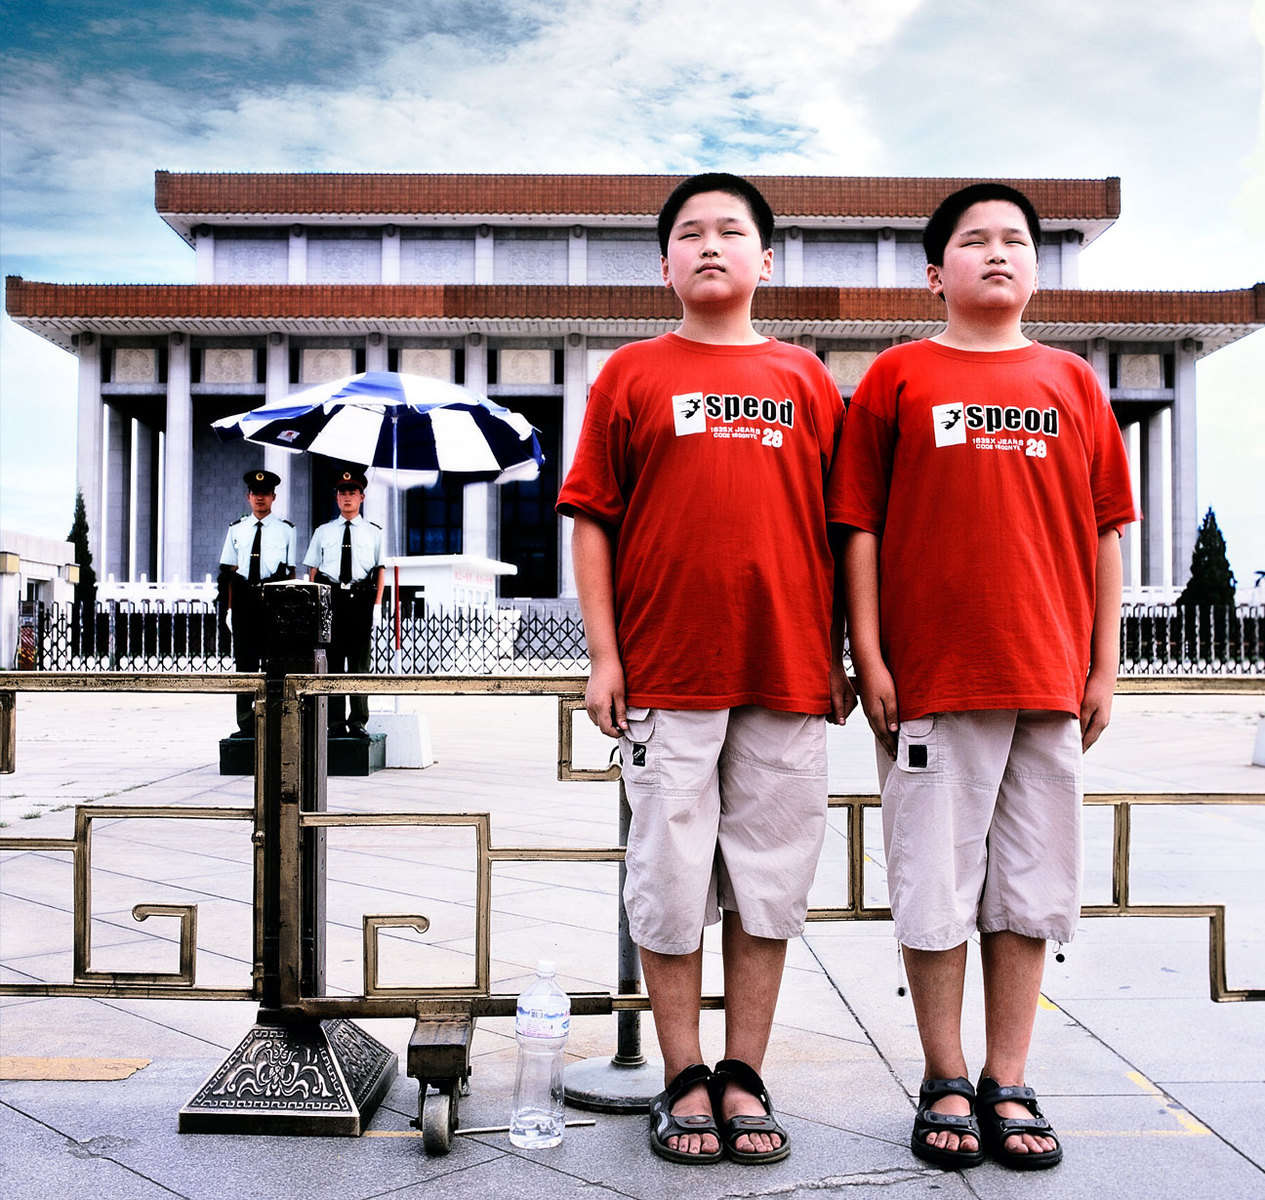 Contemporary China Tiananmen Square  : On The Road : New York City portrait photographer